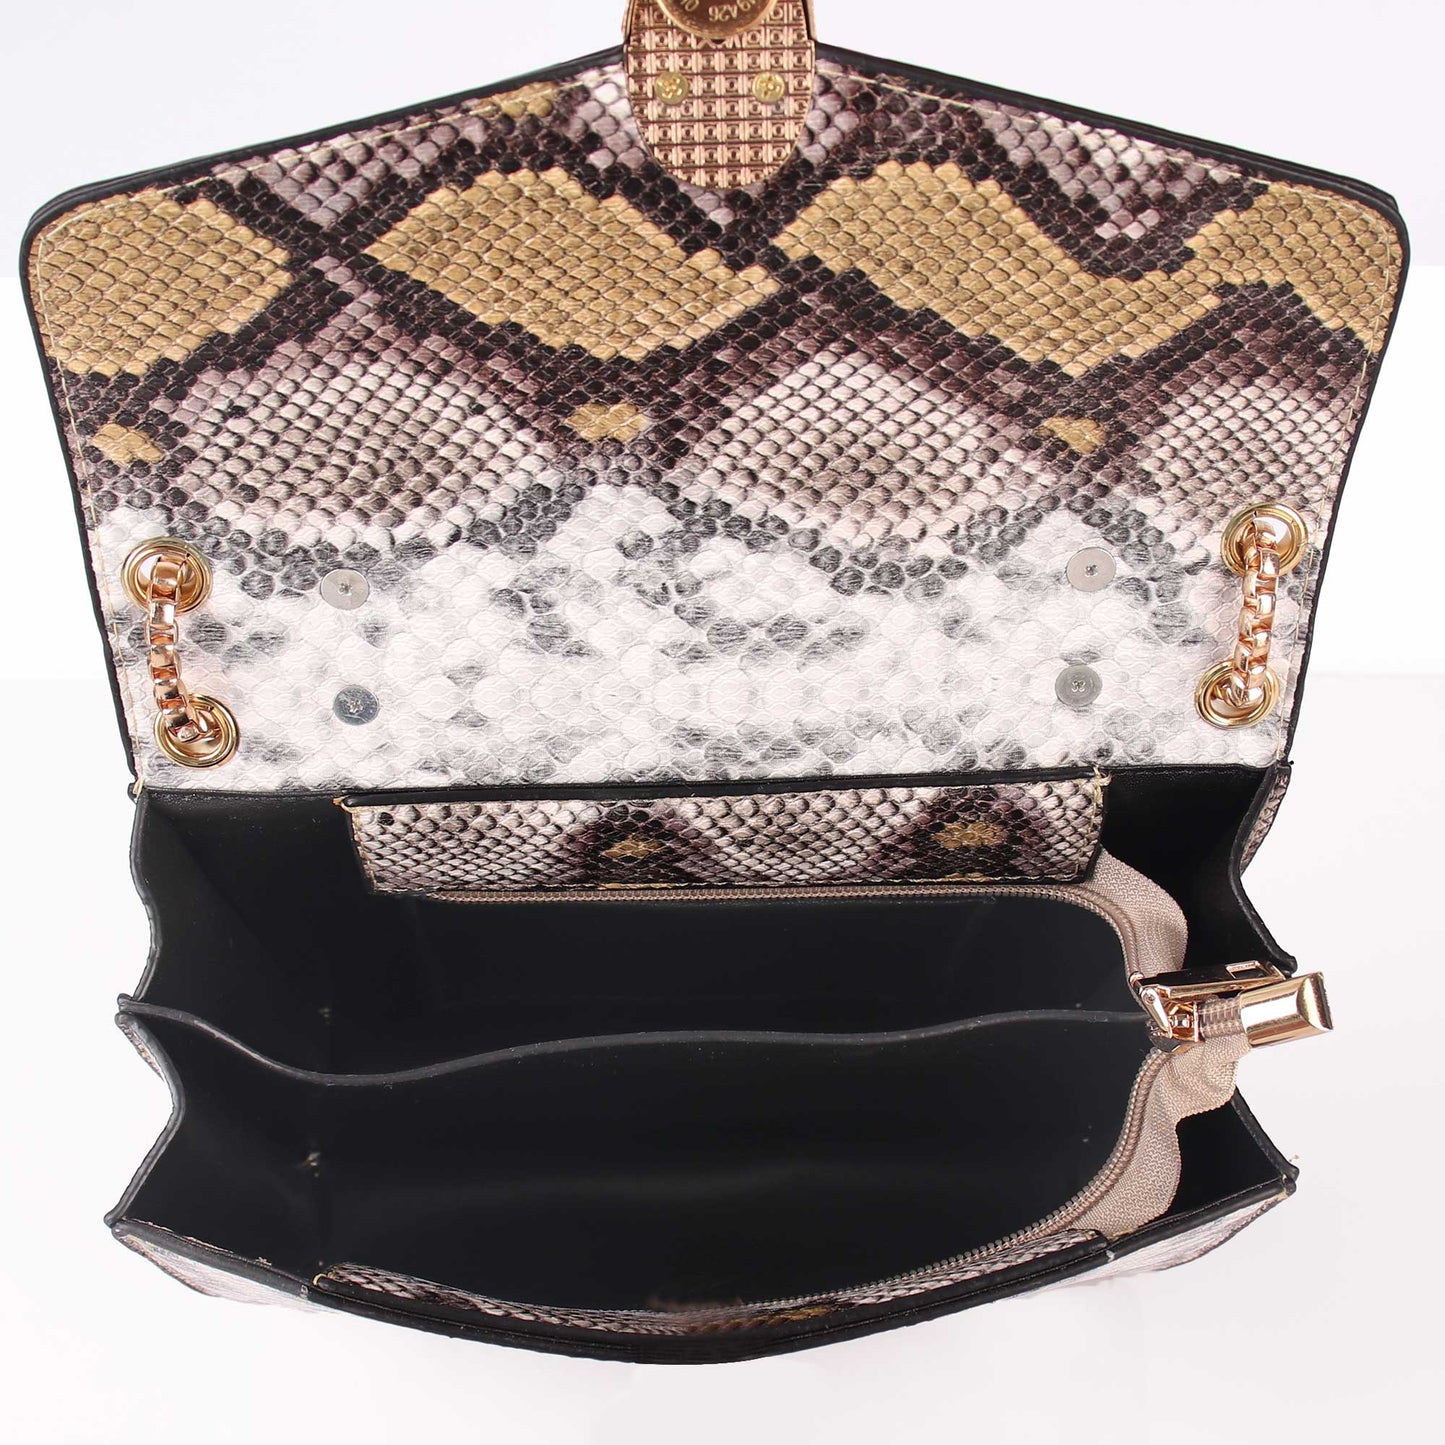 The Exotic Print Sling Bag in Shades of Yellow